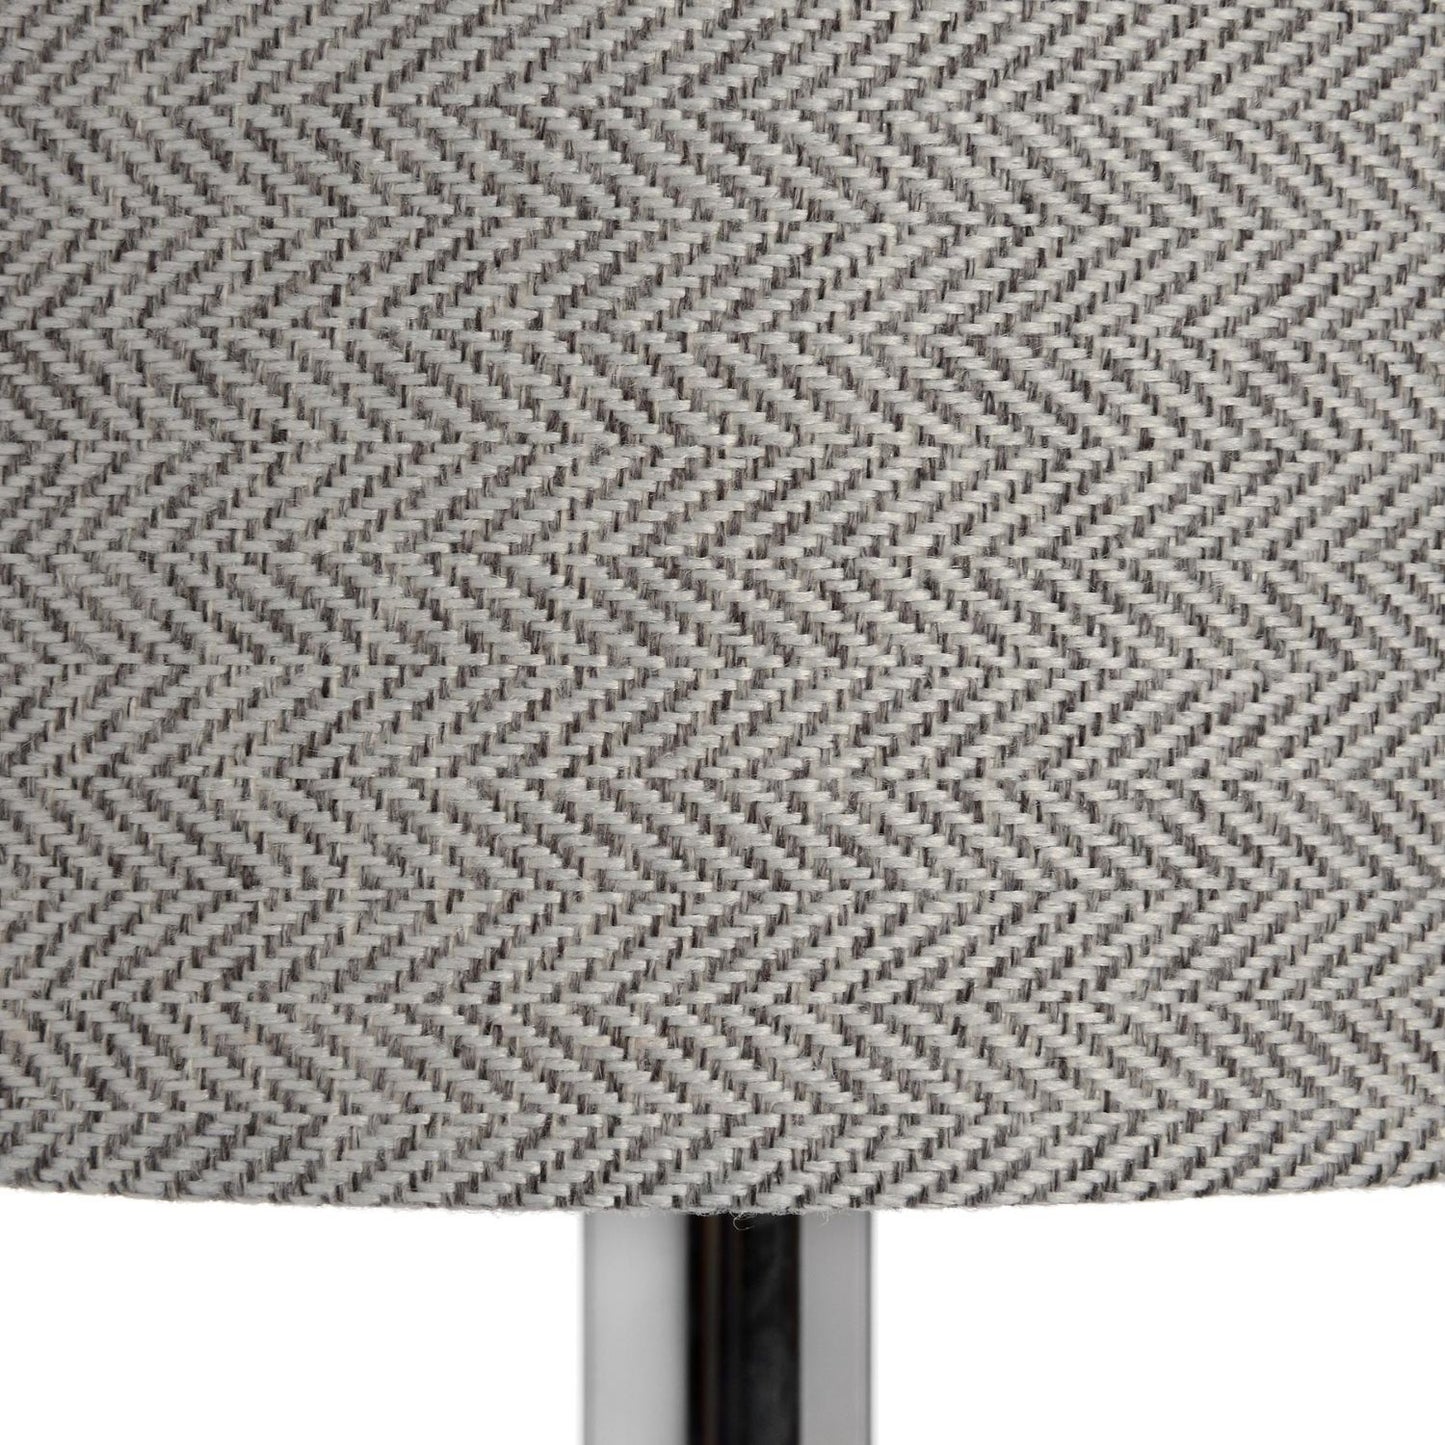 Silver Table Lamp with Grey Shade, called Knightsbridge